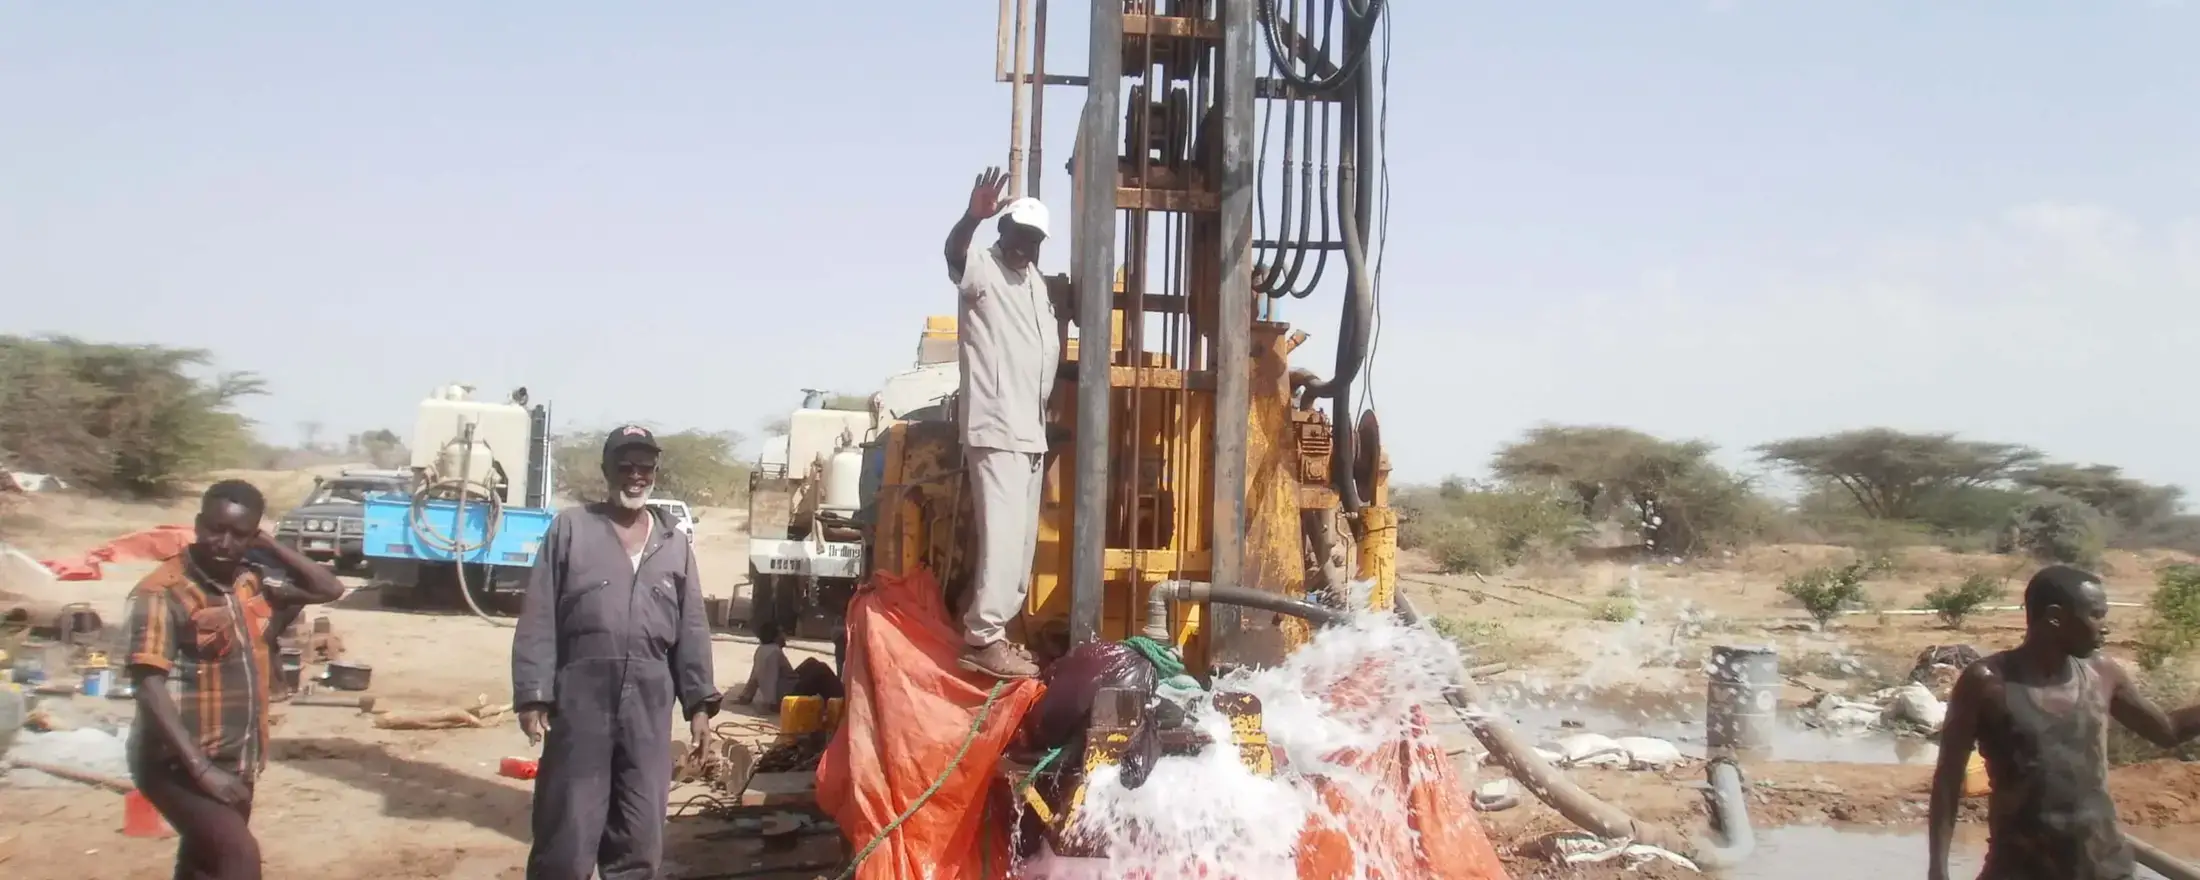 Hargeisa residents benefit from clean water